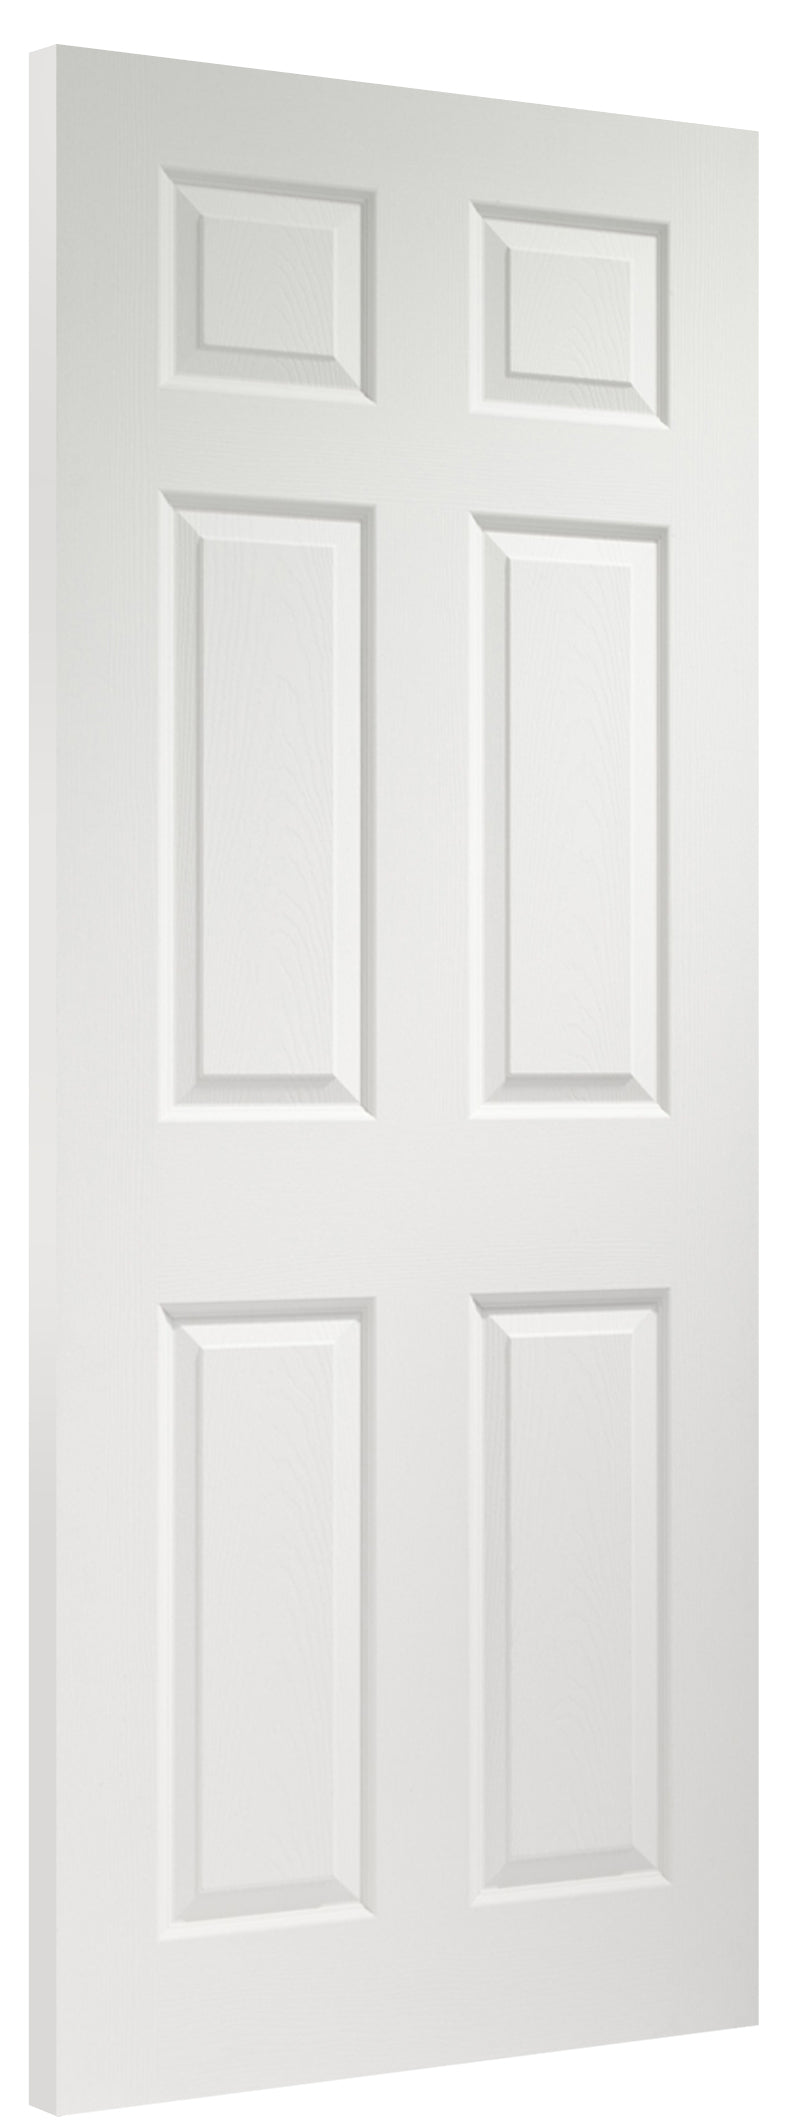 Internal Pre-finished White Moulded Colonist 6 Panel Door